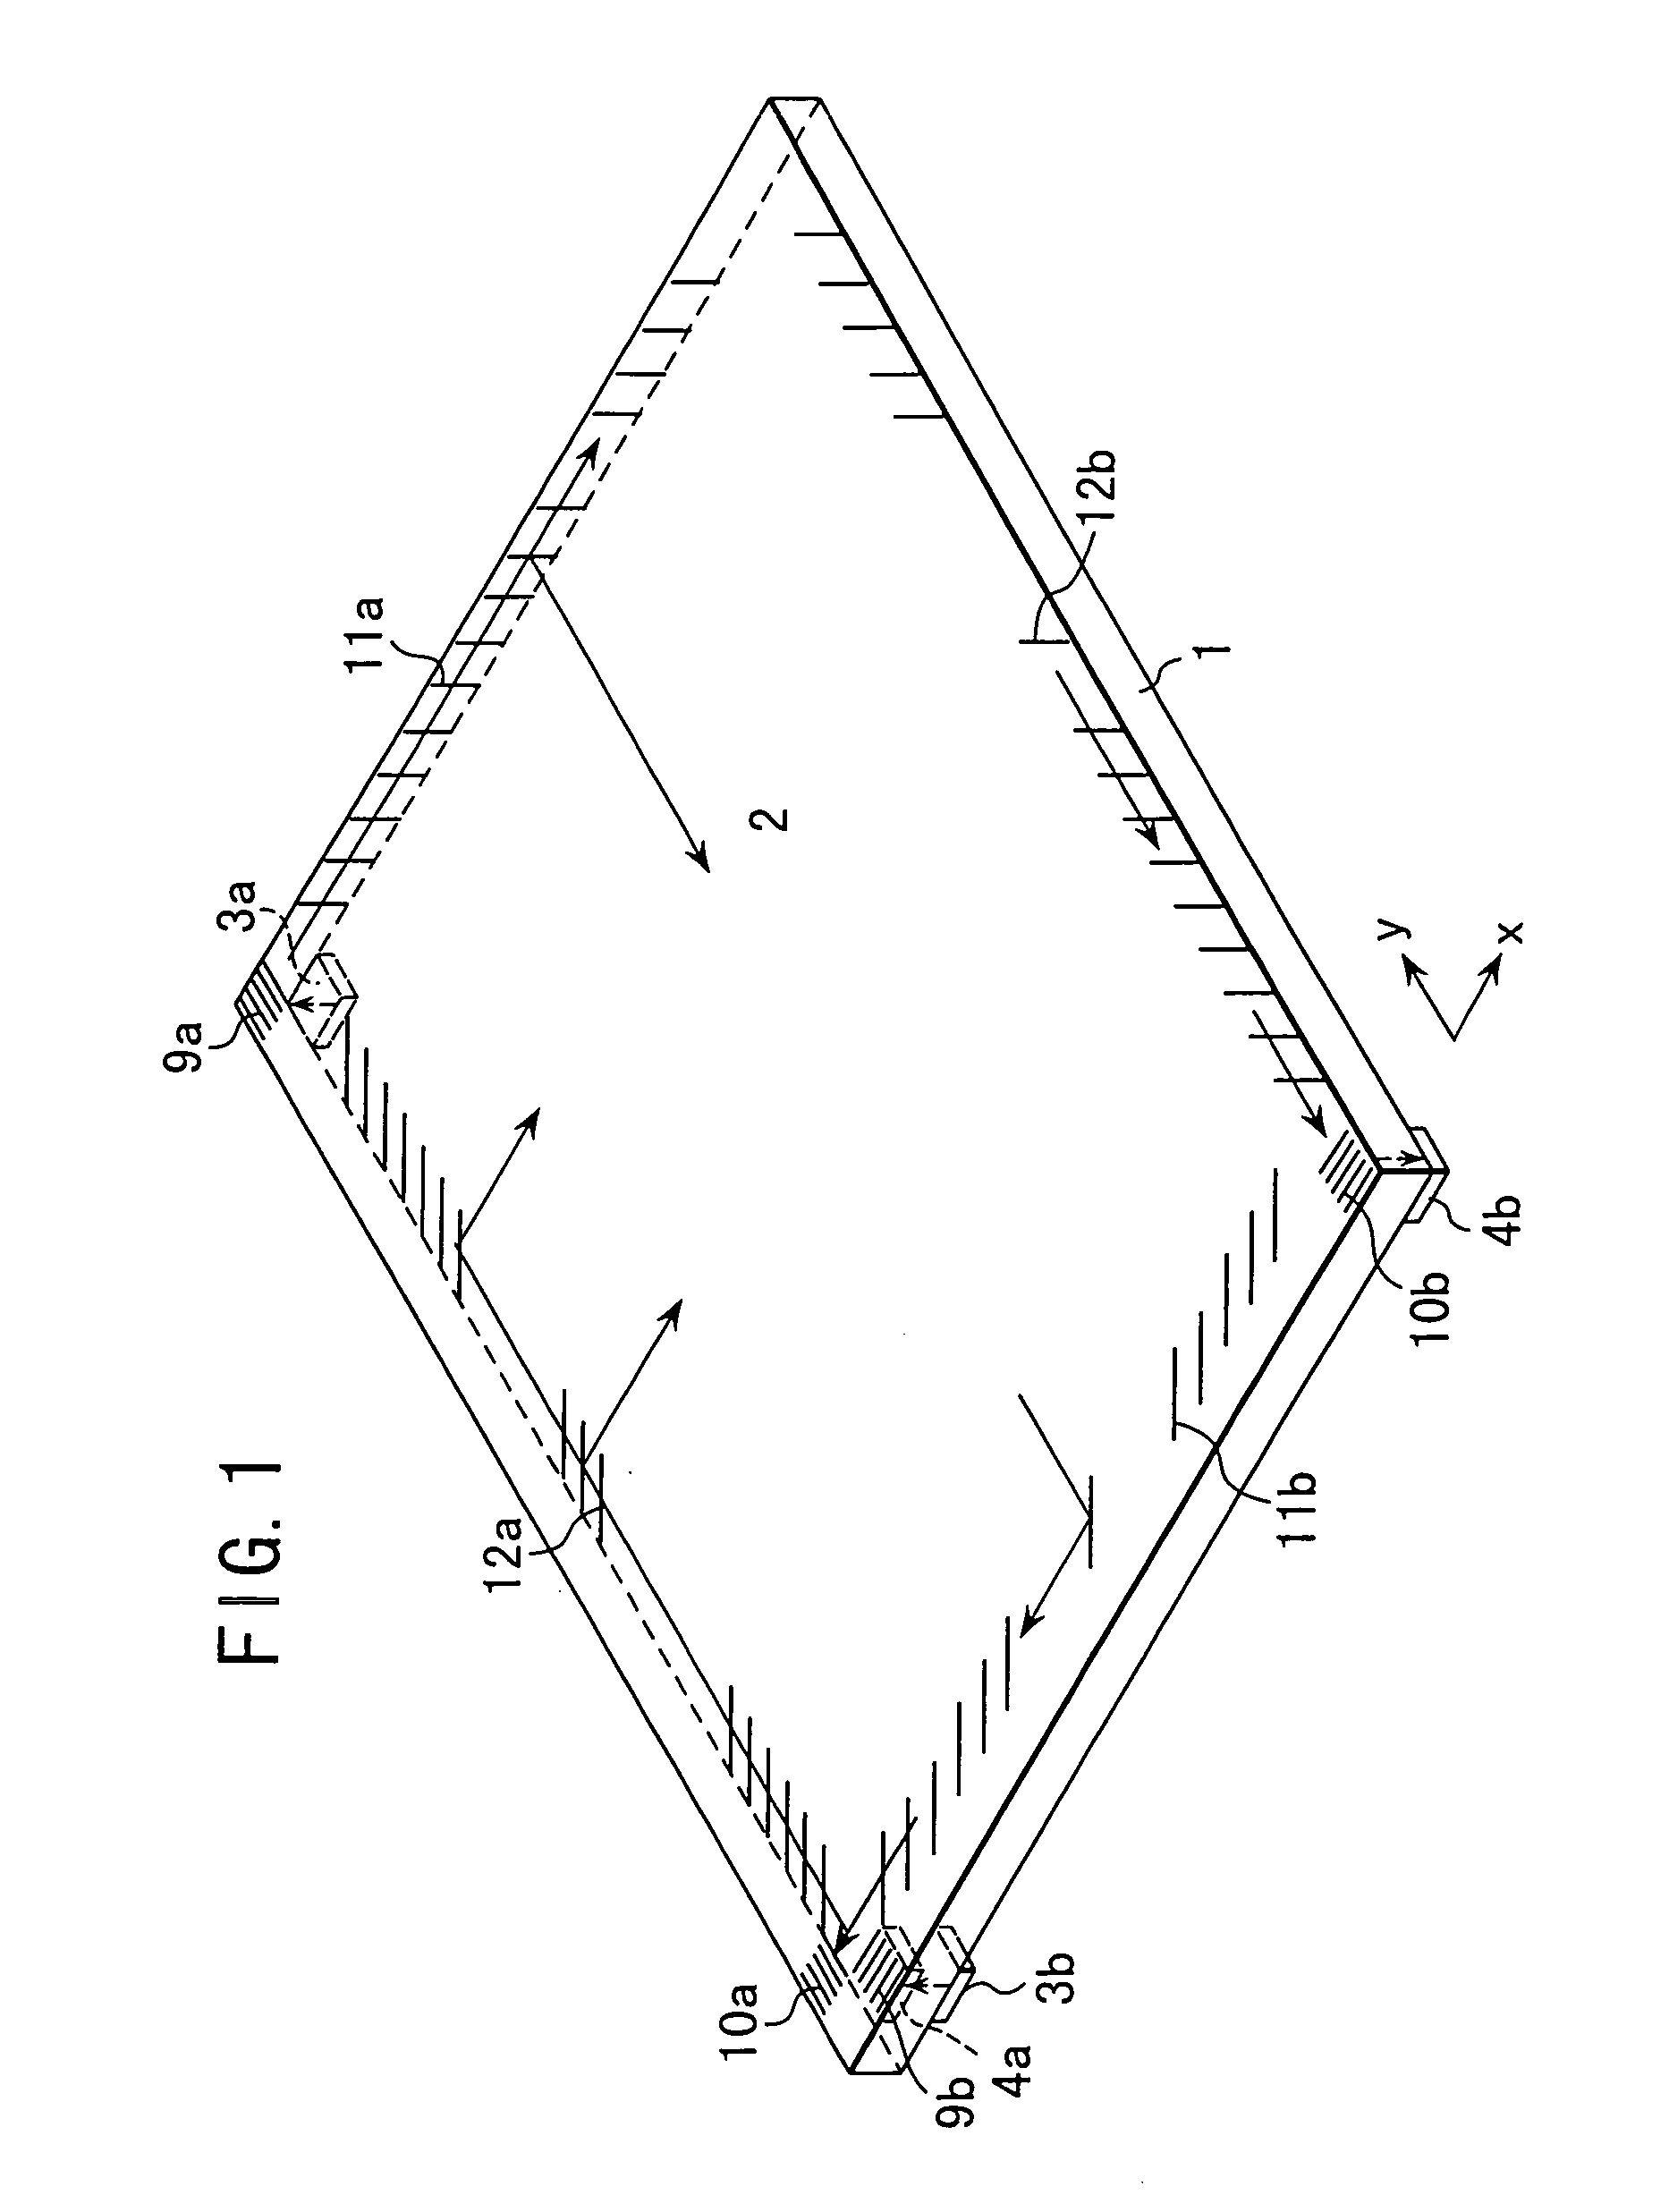 Acoustic contact detecting device